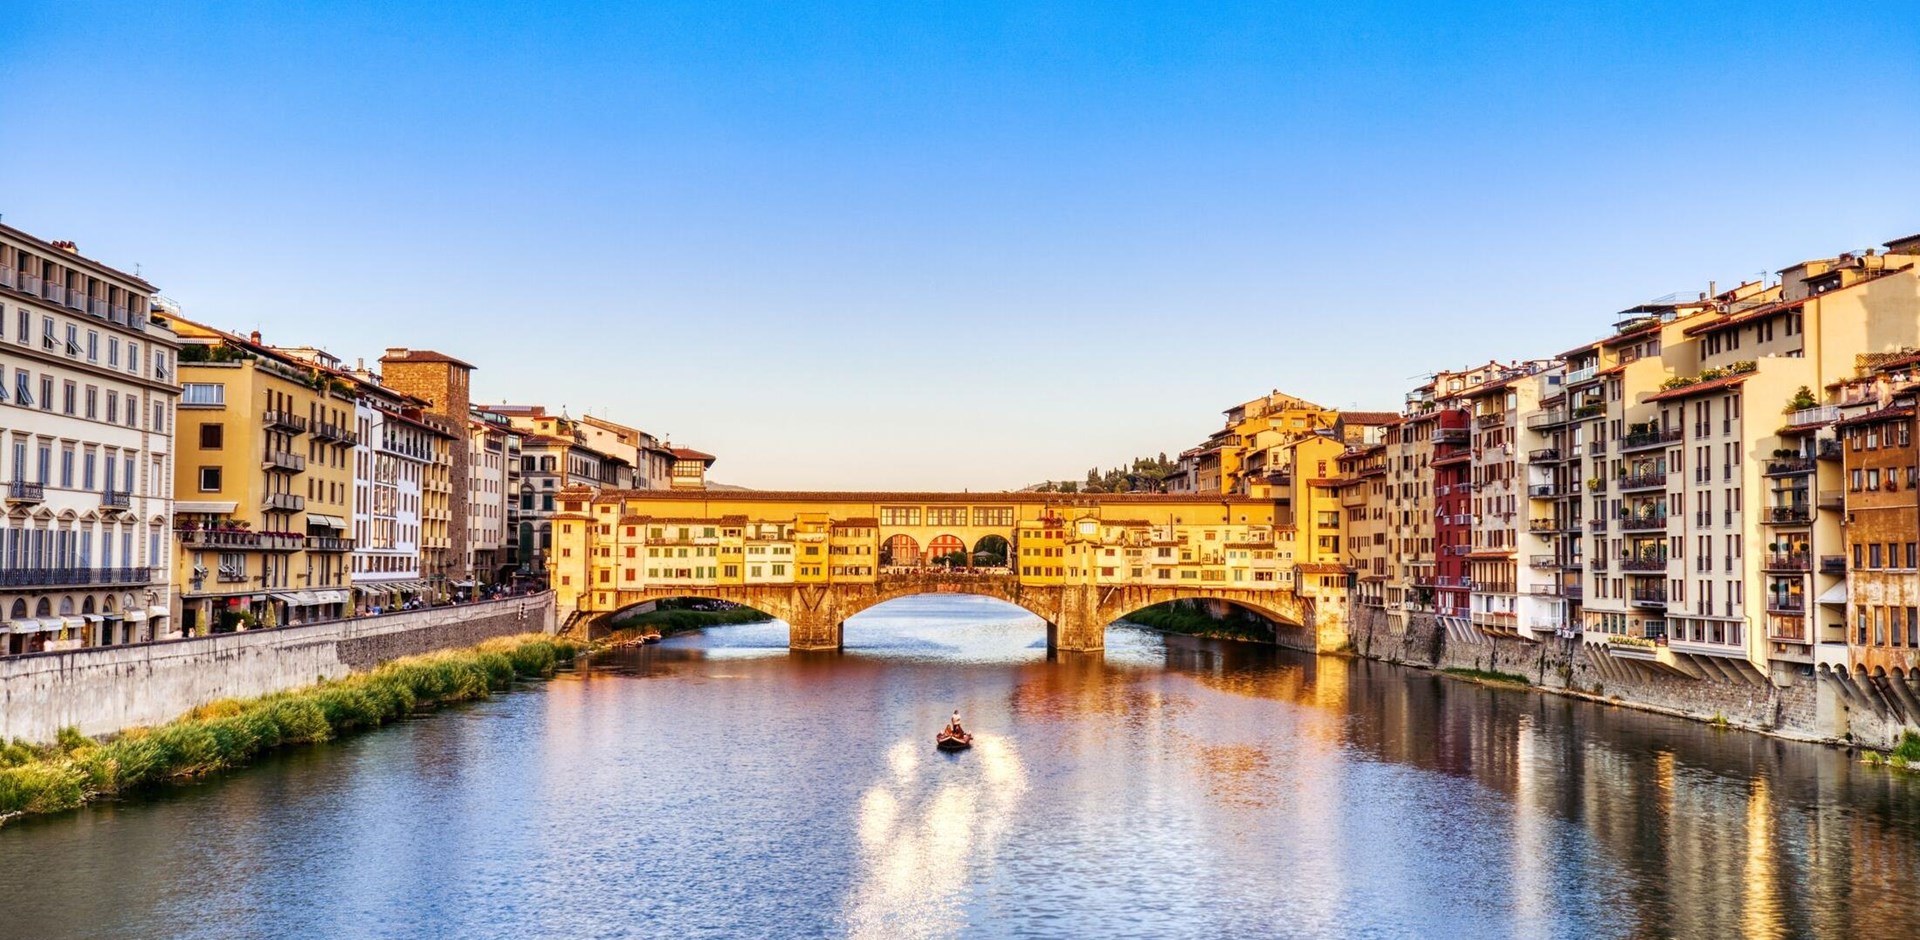 Golden Sunset over Ponte Vecchio Bridge with Traditional Boat on the Arno River, Florence, Italy